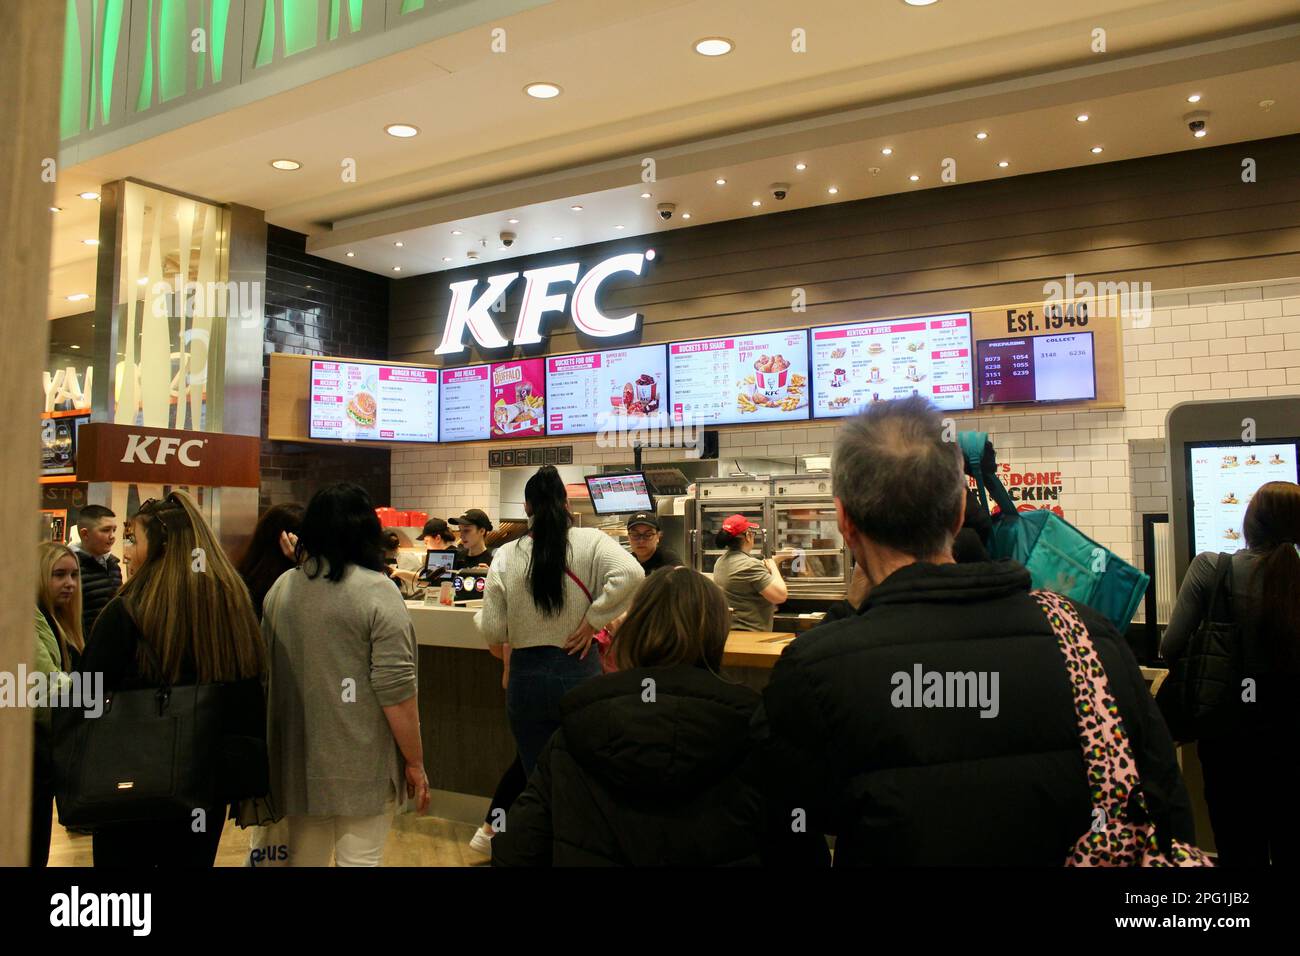 customers at kfc among the restaurants and food outlets inside derbion shopping centre derby england uk Stock Photo